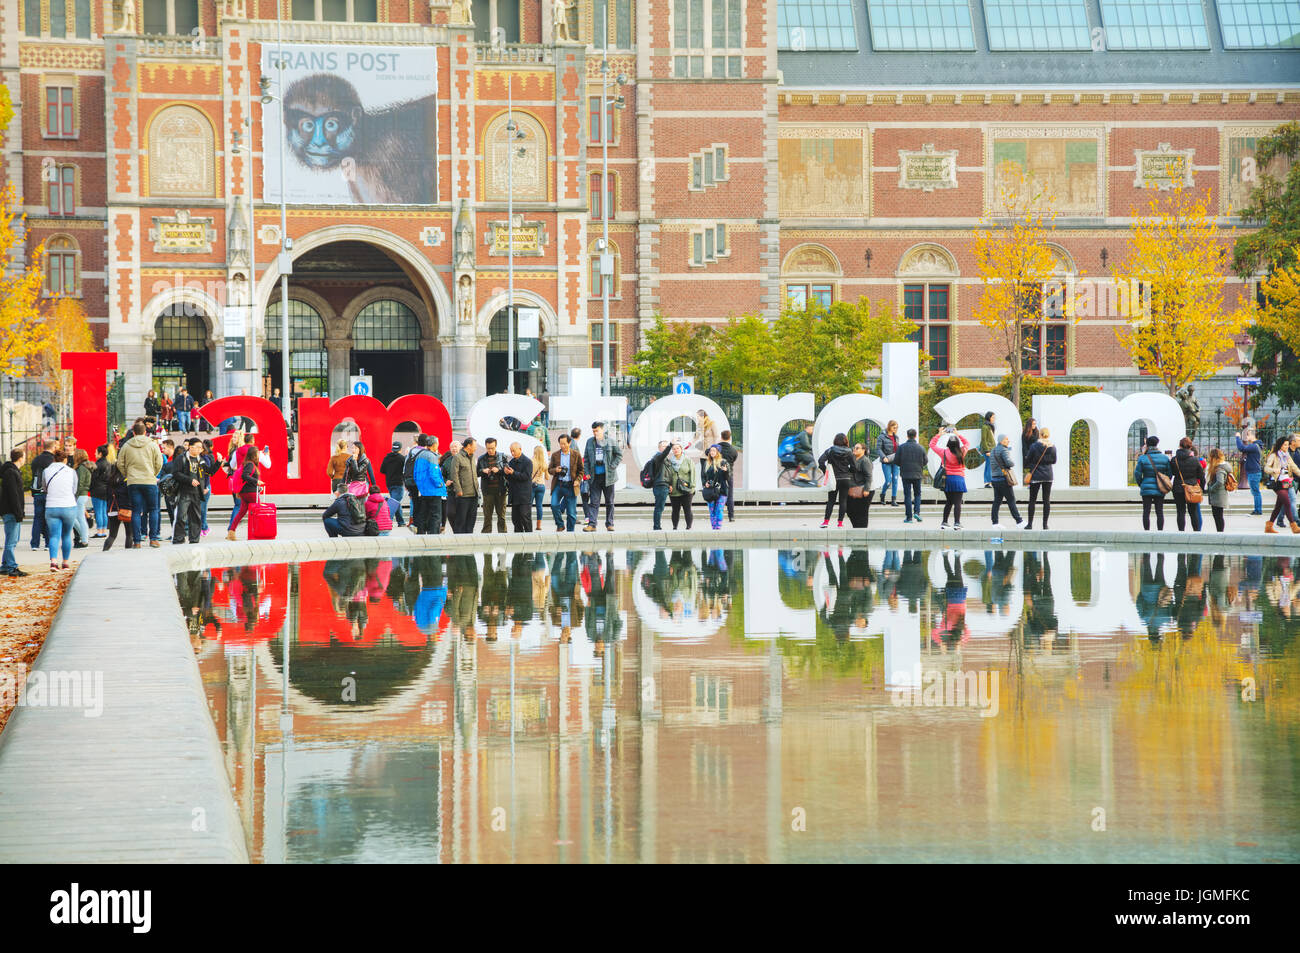 AMSTERDAM - OCTOBER 30: I Amsterdam slogan on October 30, 2016 in Amsterdam, Netherlands. Located at the back of the Rijksmuseum on Museumplein, the s Stock Photo